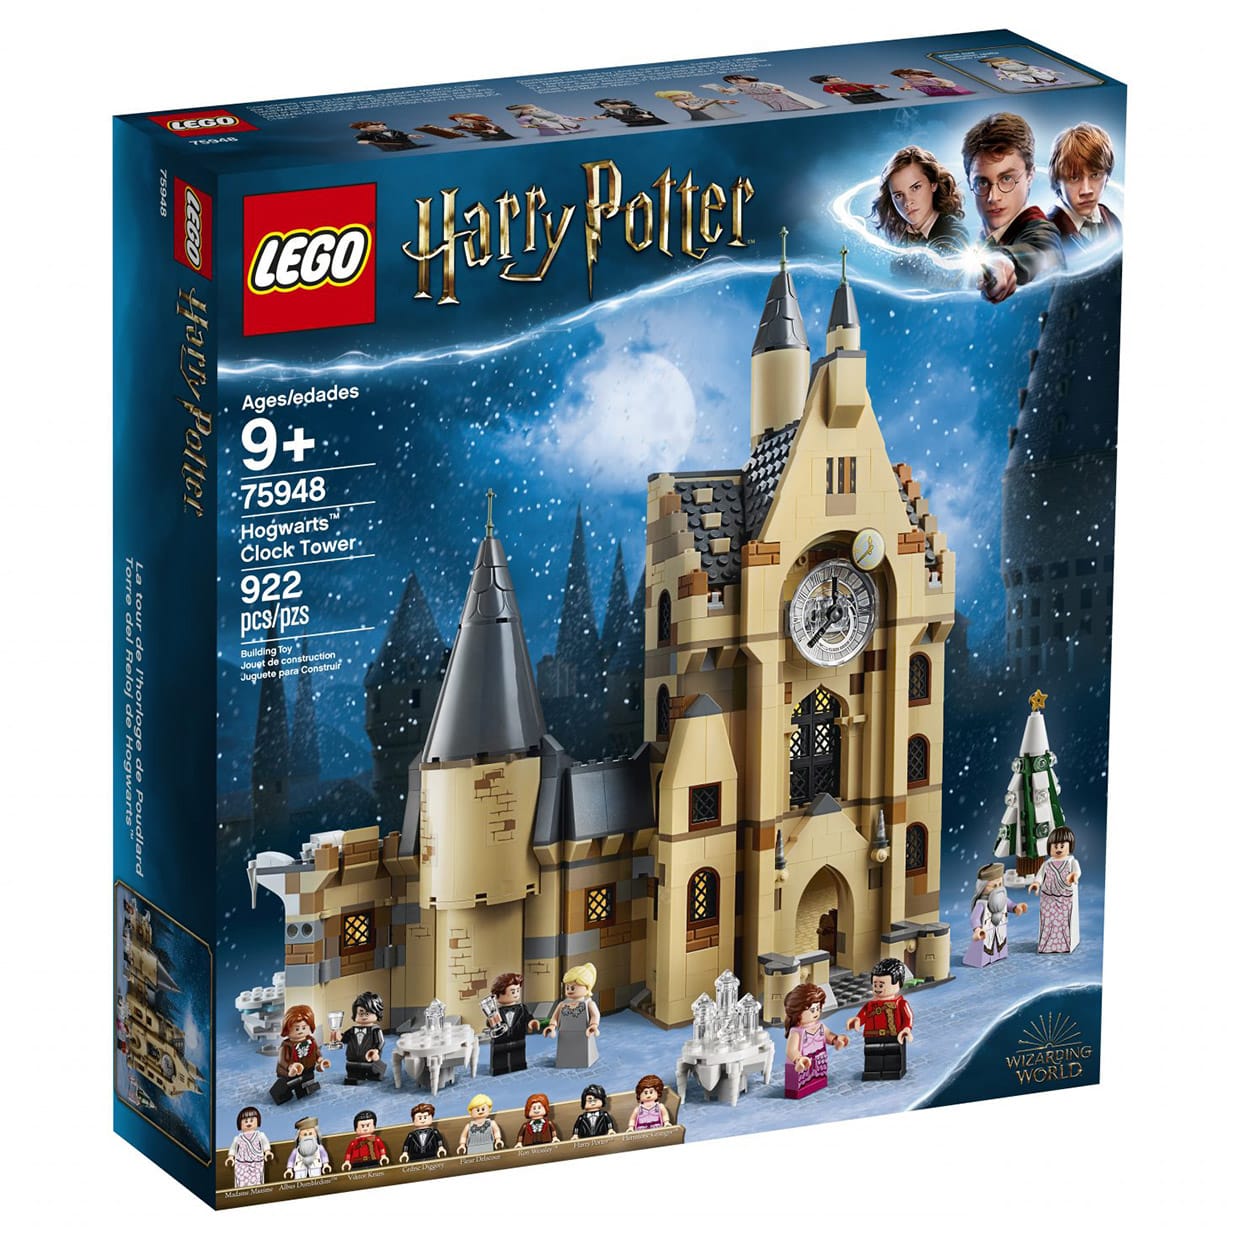 New LEGO Harry Potter Kits Land This August